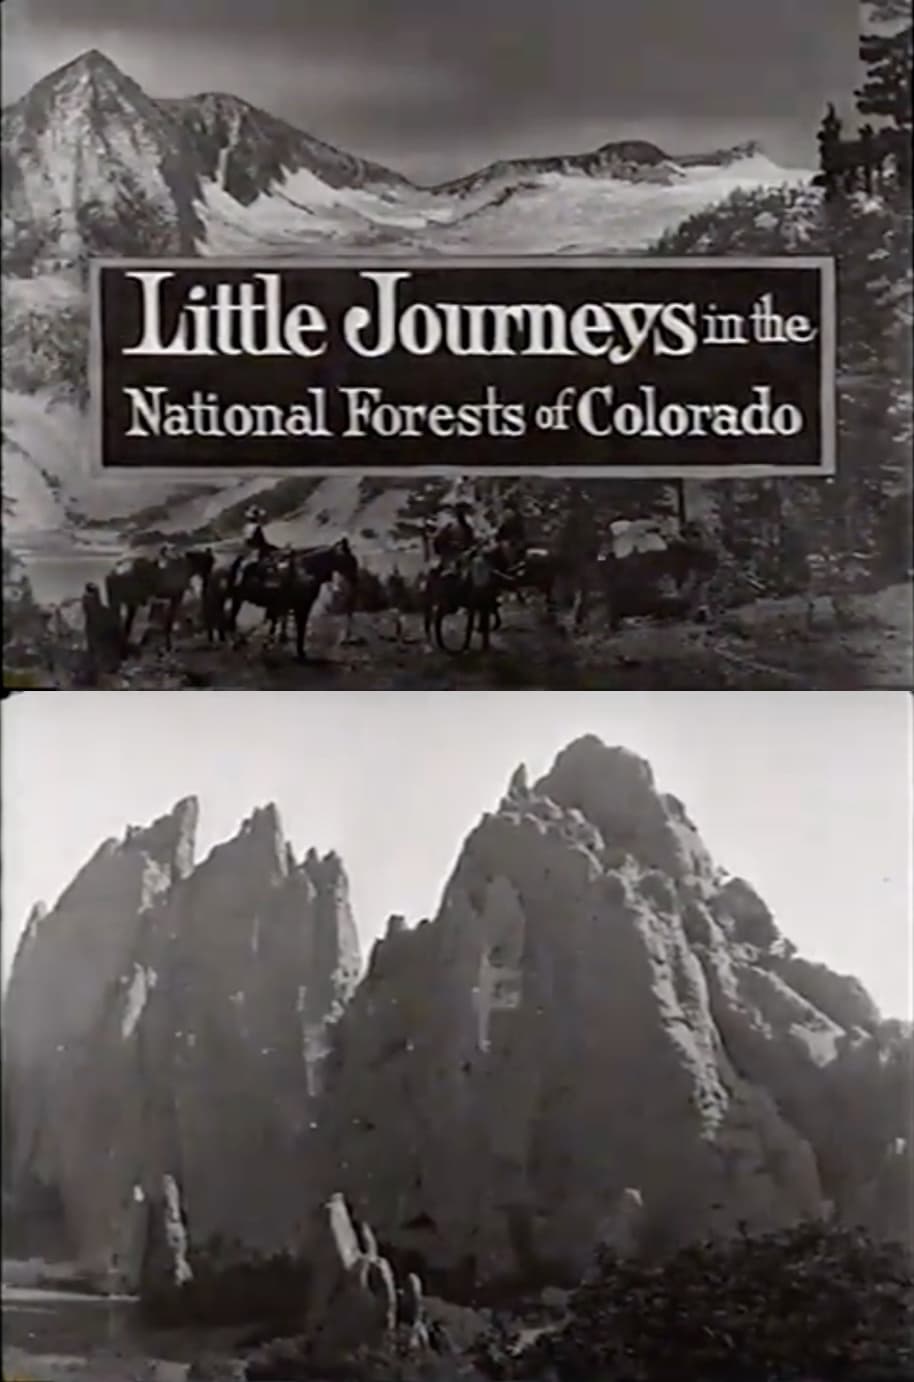 Little Journeys in the National Forests of Colorado